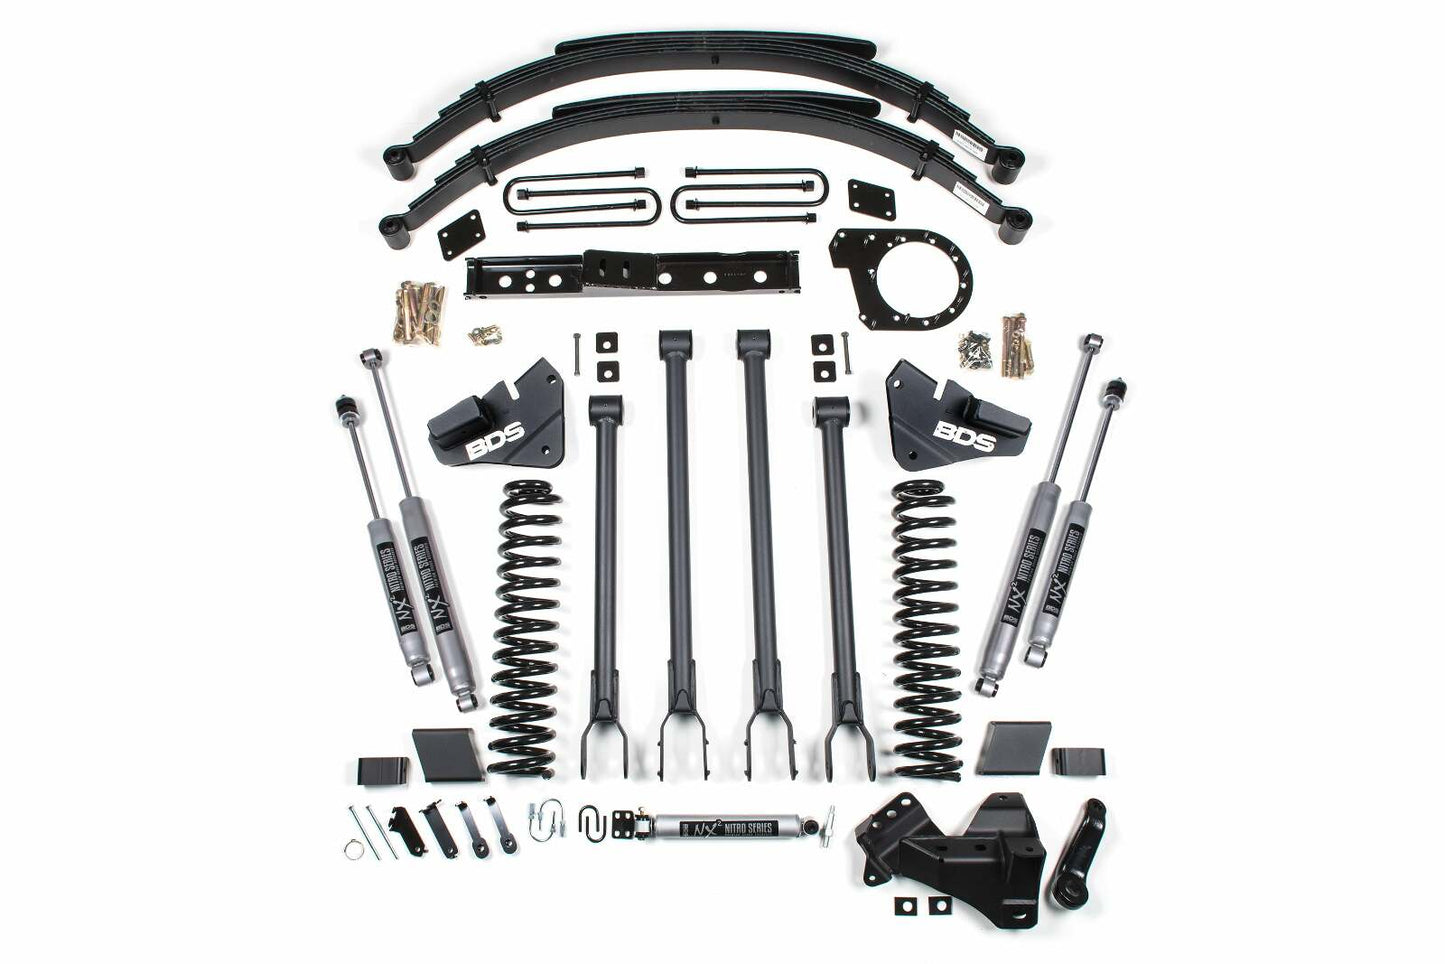 2017-2019 Ford F250/F350 4wd 6" 4-Link Suspension Lift Kit, 4" Rear, Block and AAL, Diesel, 2 Leaf Main - Fox 2.5 PES Shocks